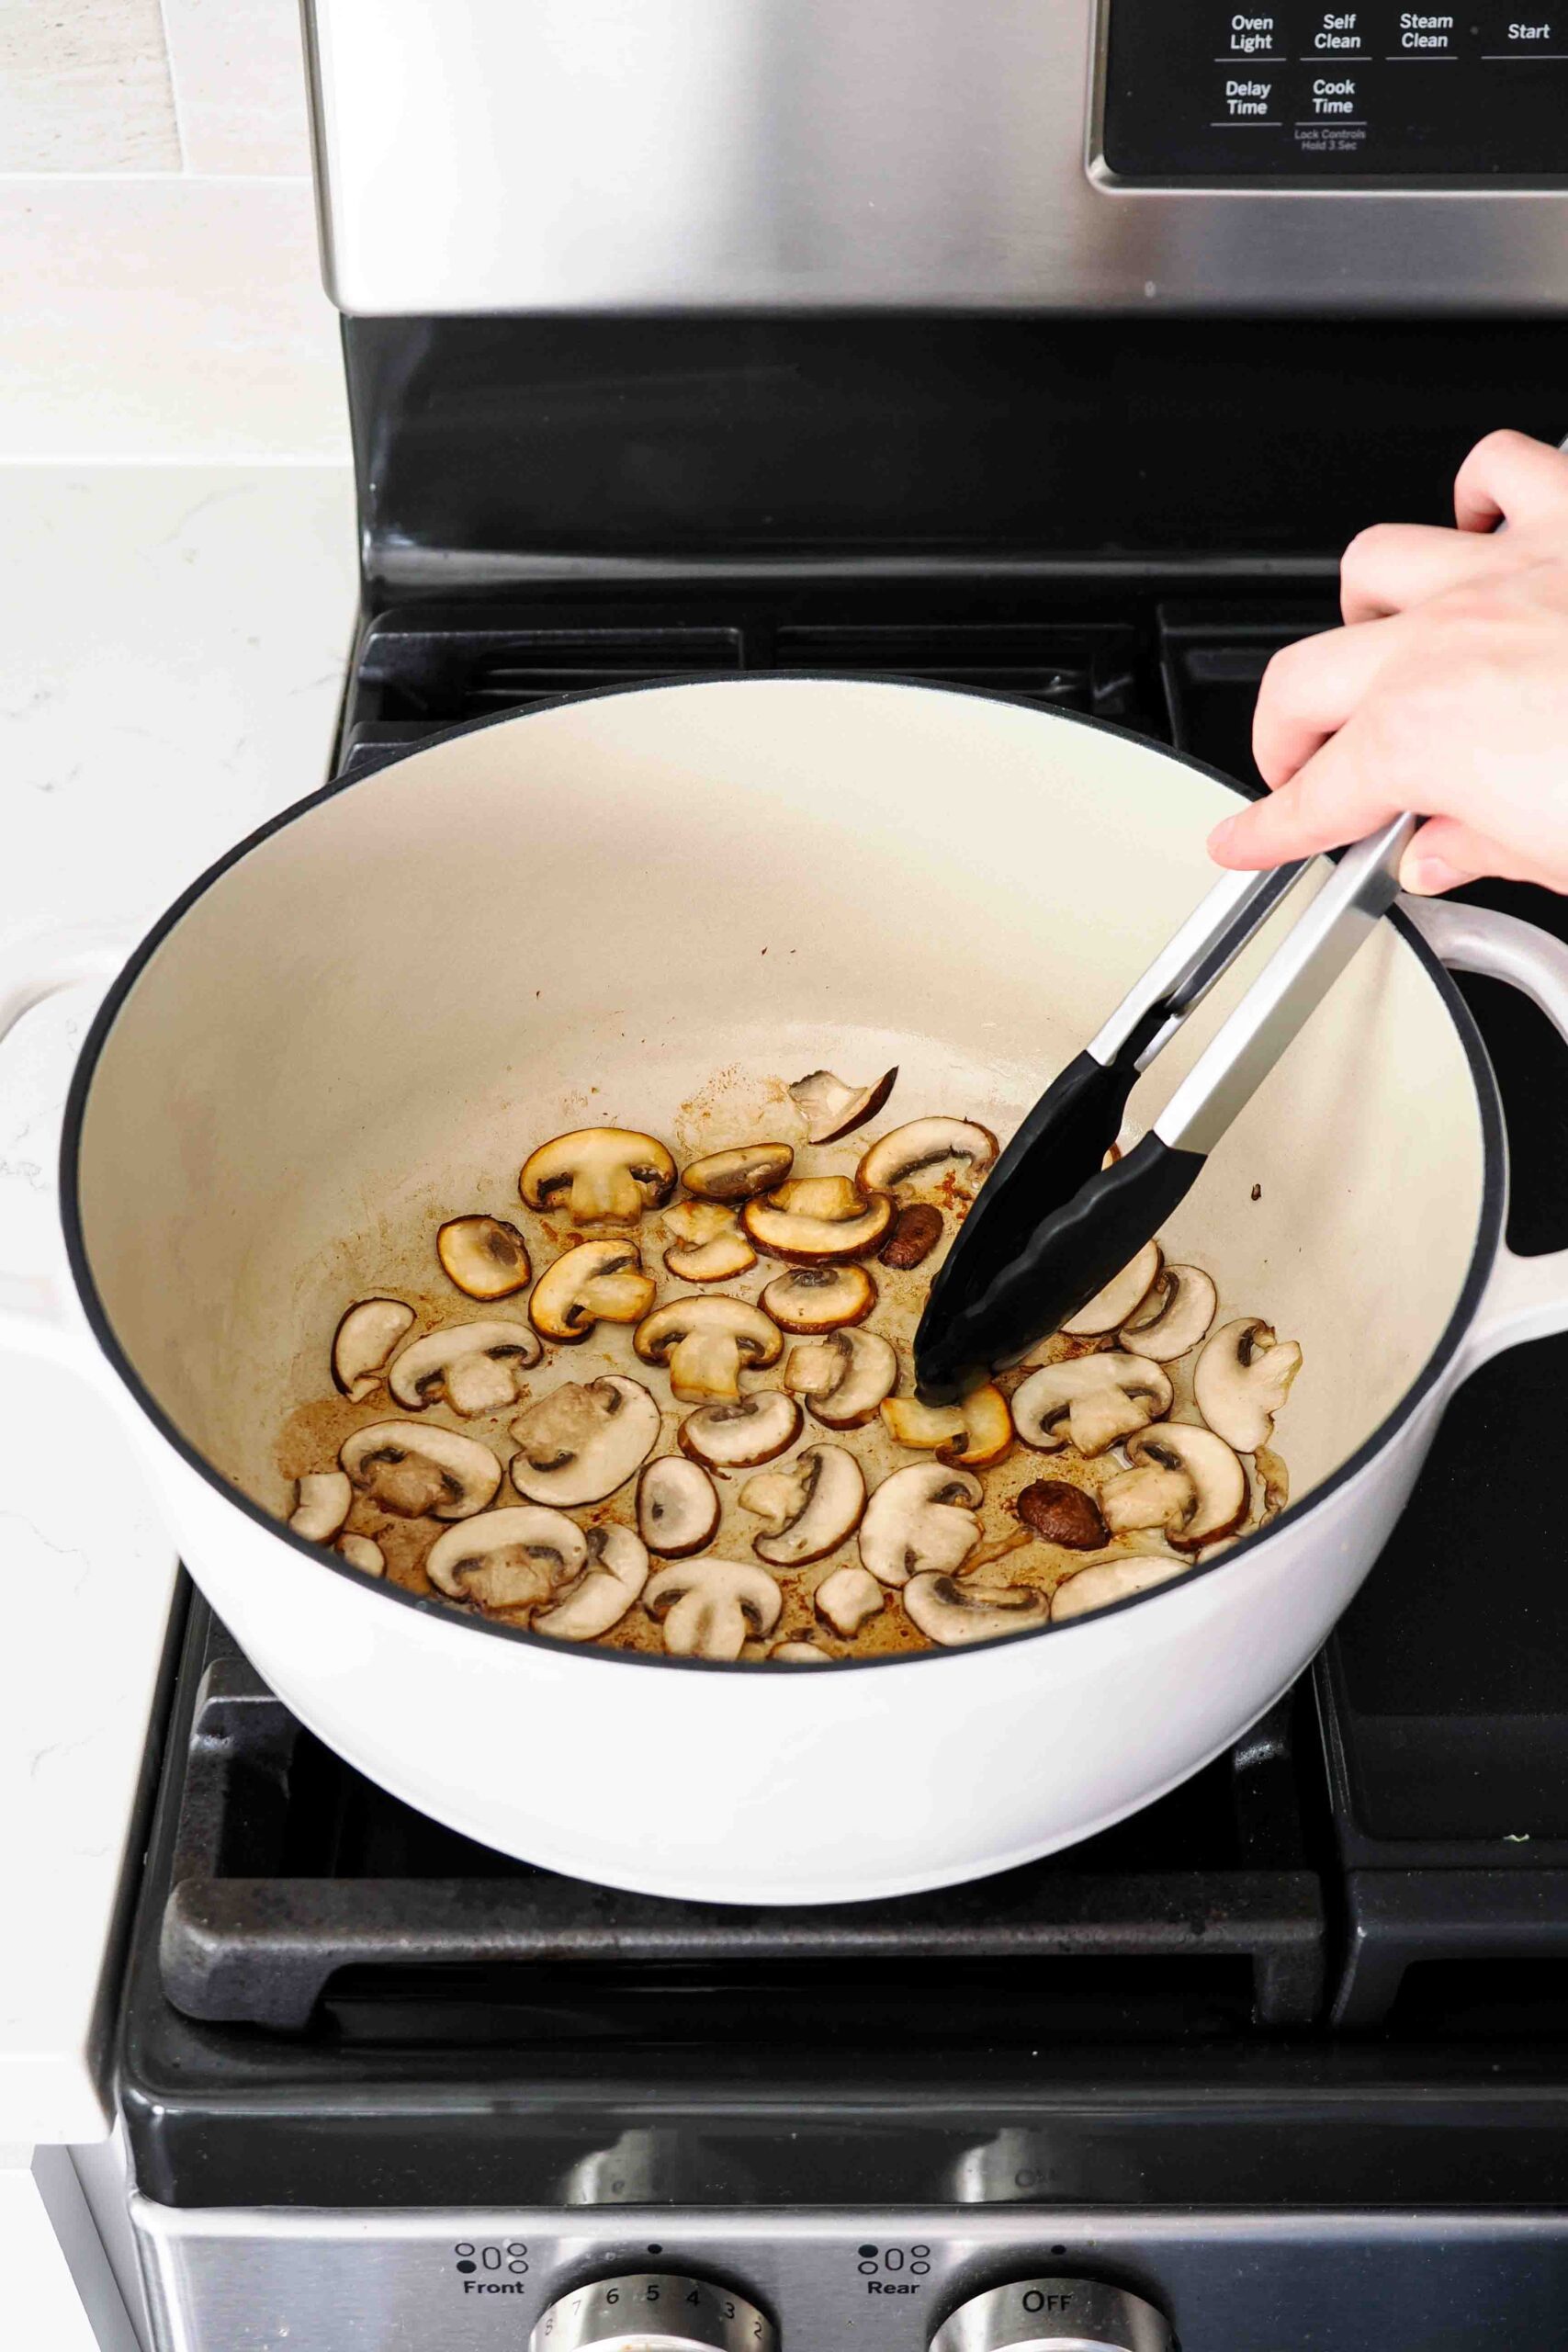 A hand uses tongs to flip over sliced mushrooms in a Dutch oven.